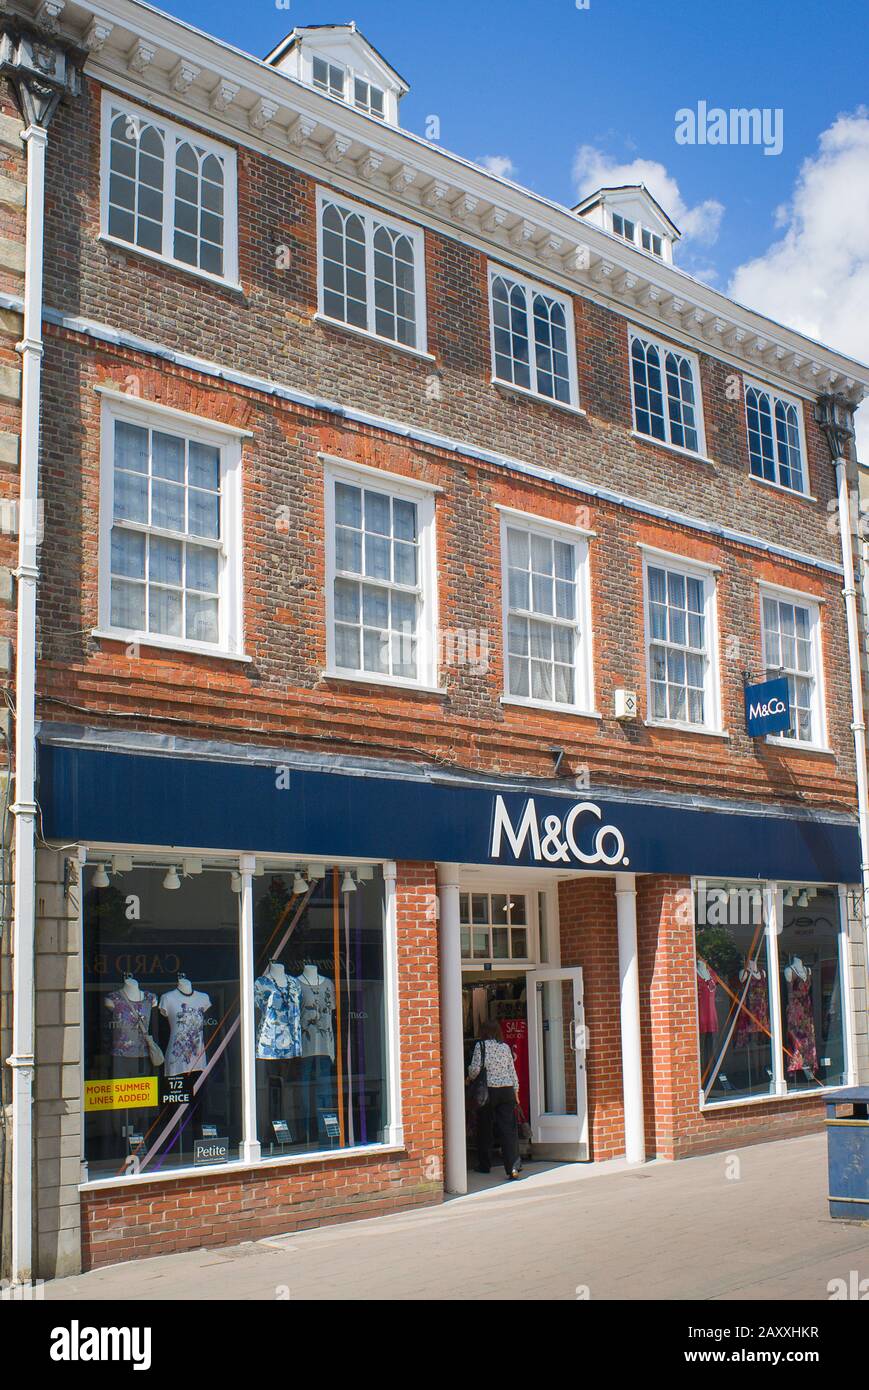 A three-storey building in The Brittox Devizes Wiltshire England UK accommodates the M&Co branch of a national chain of fashion shops Stock Photo